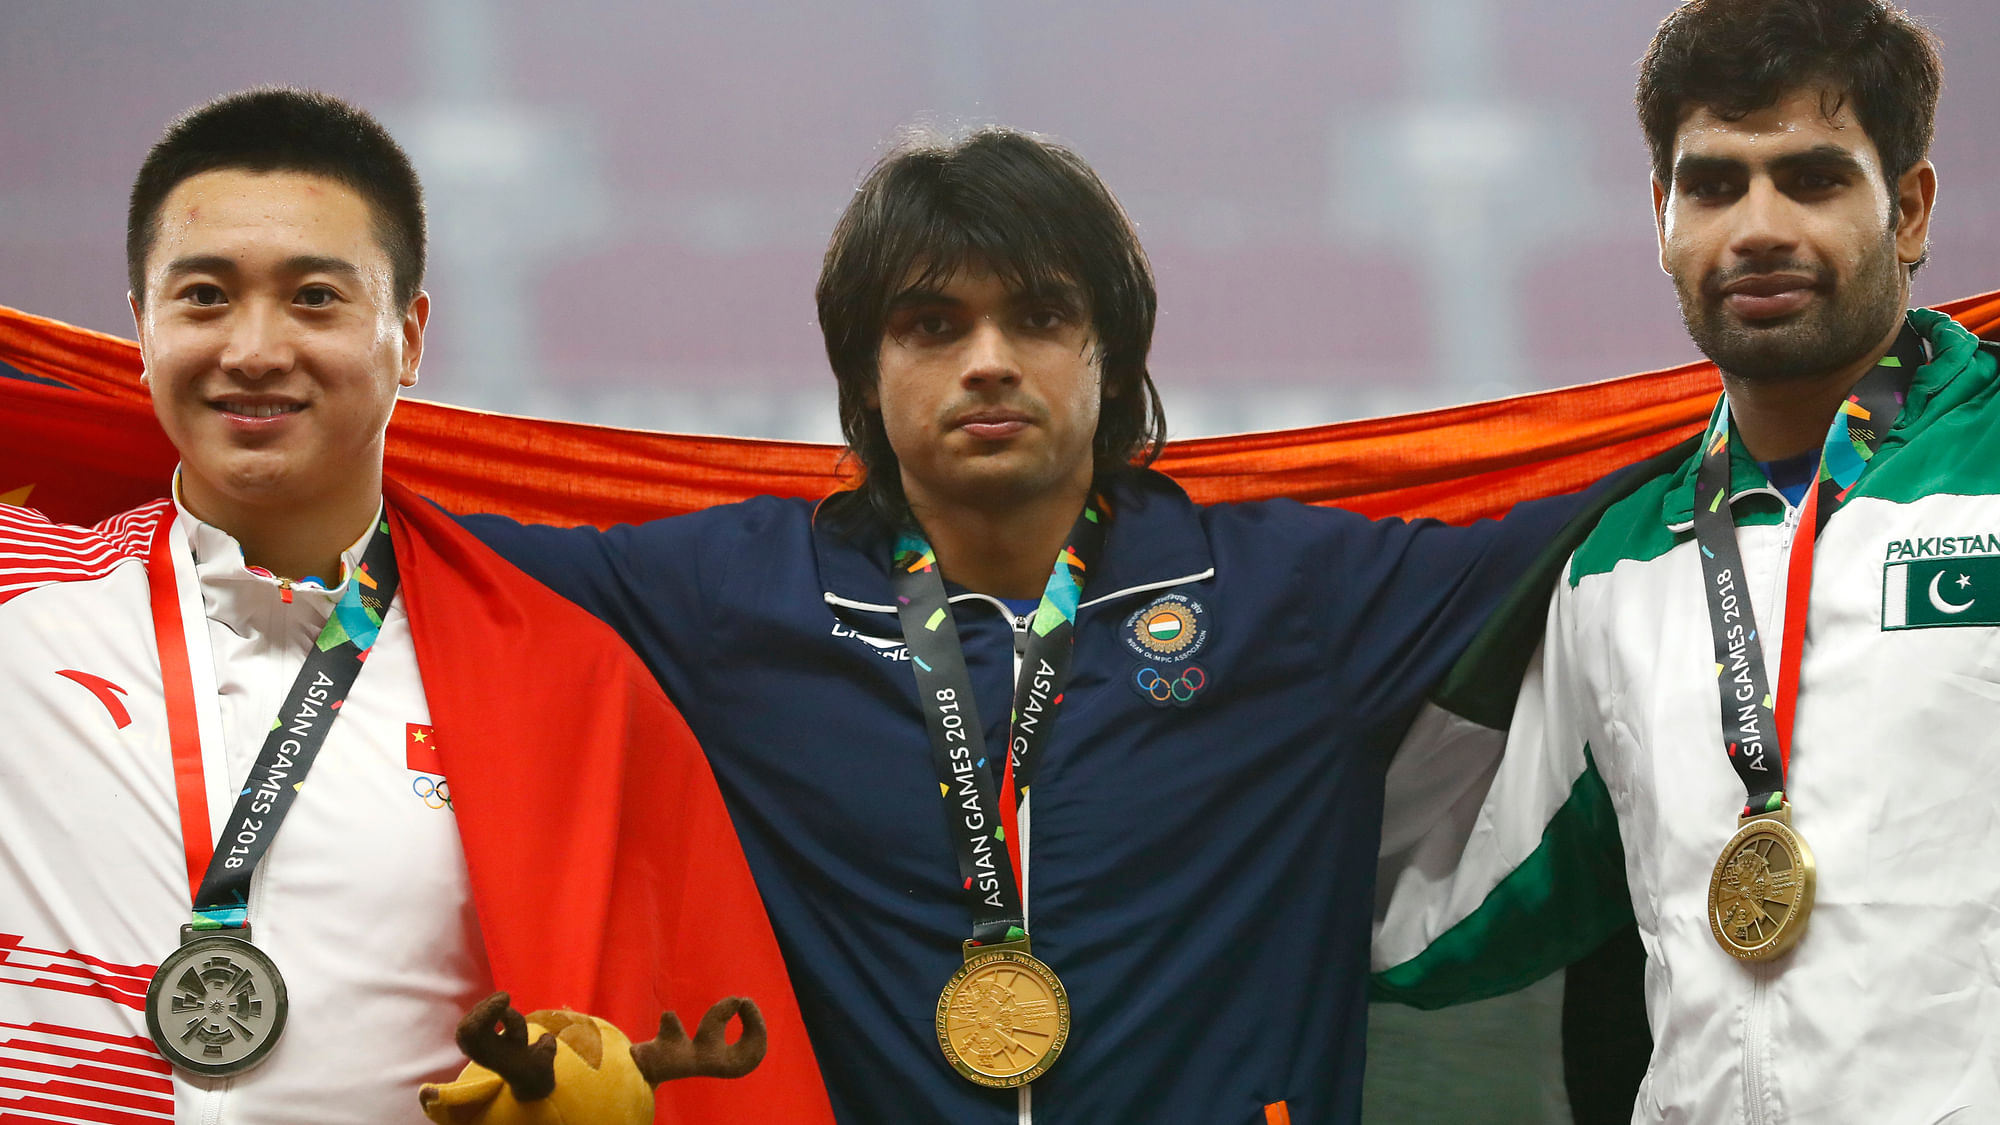 Asian Games 2018: Neeraj Chopra has become the first Indian to win a gold medal in men’s javelin throw at the Asian Games.